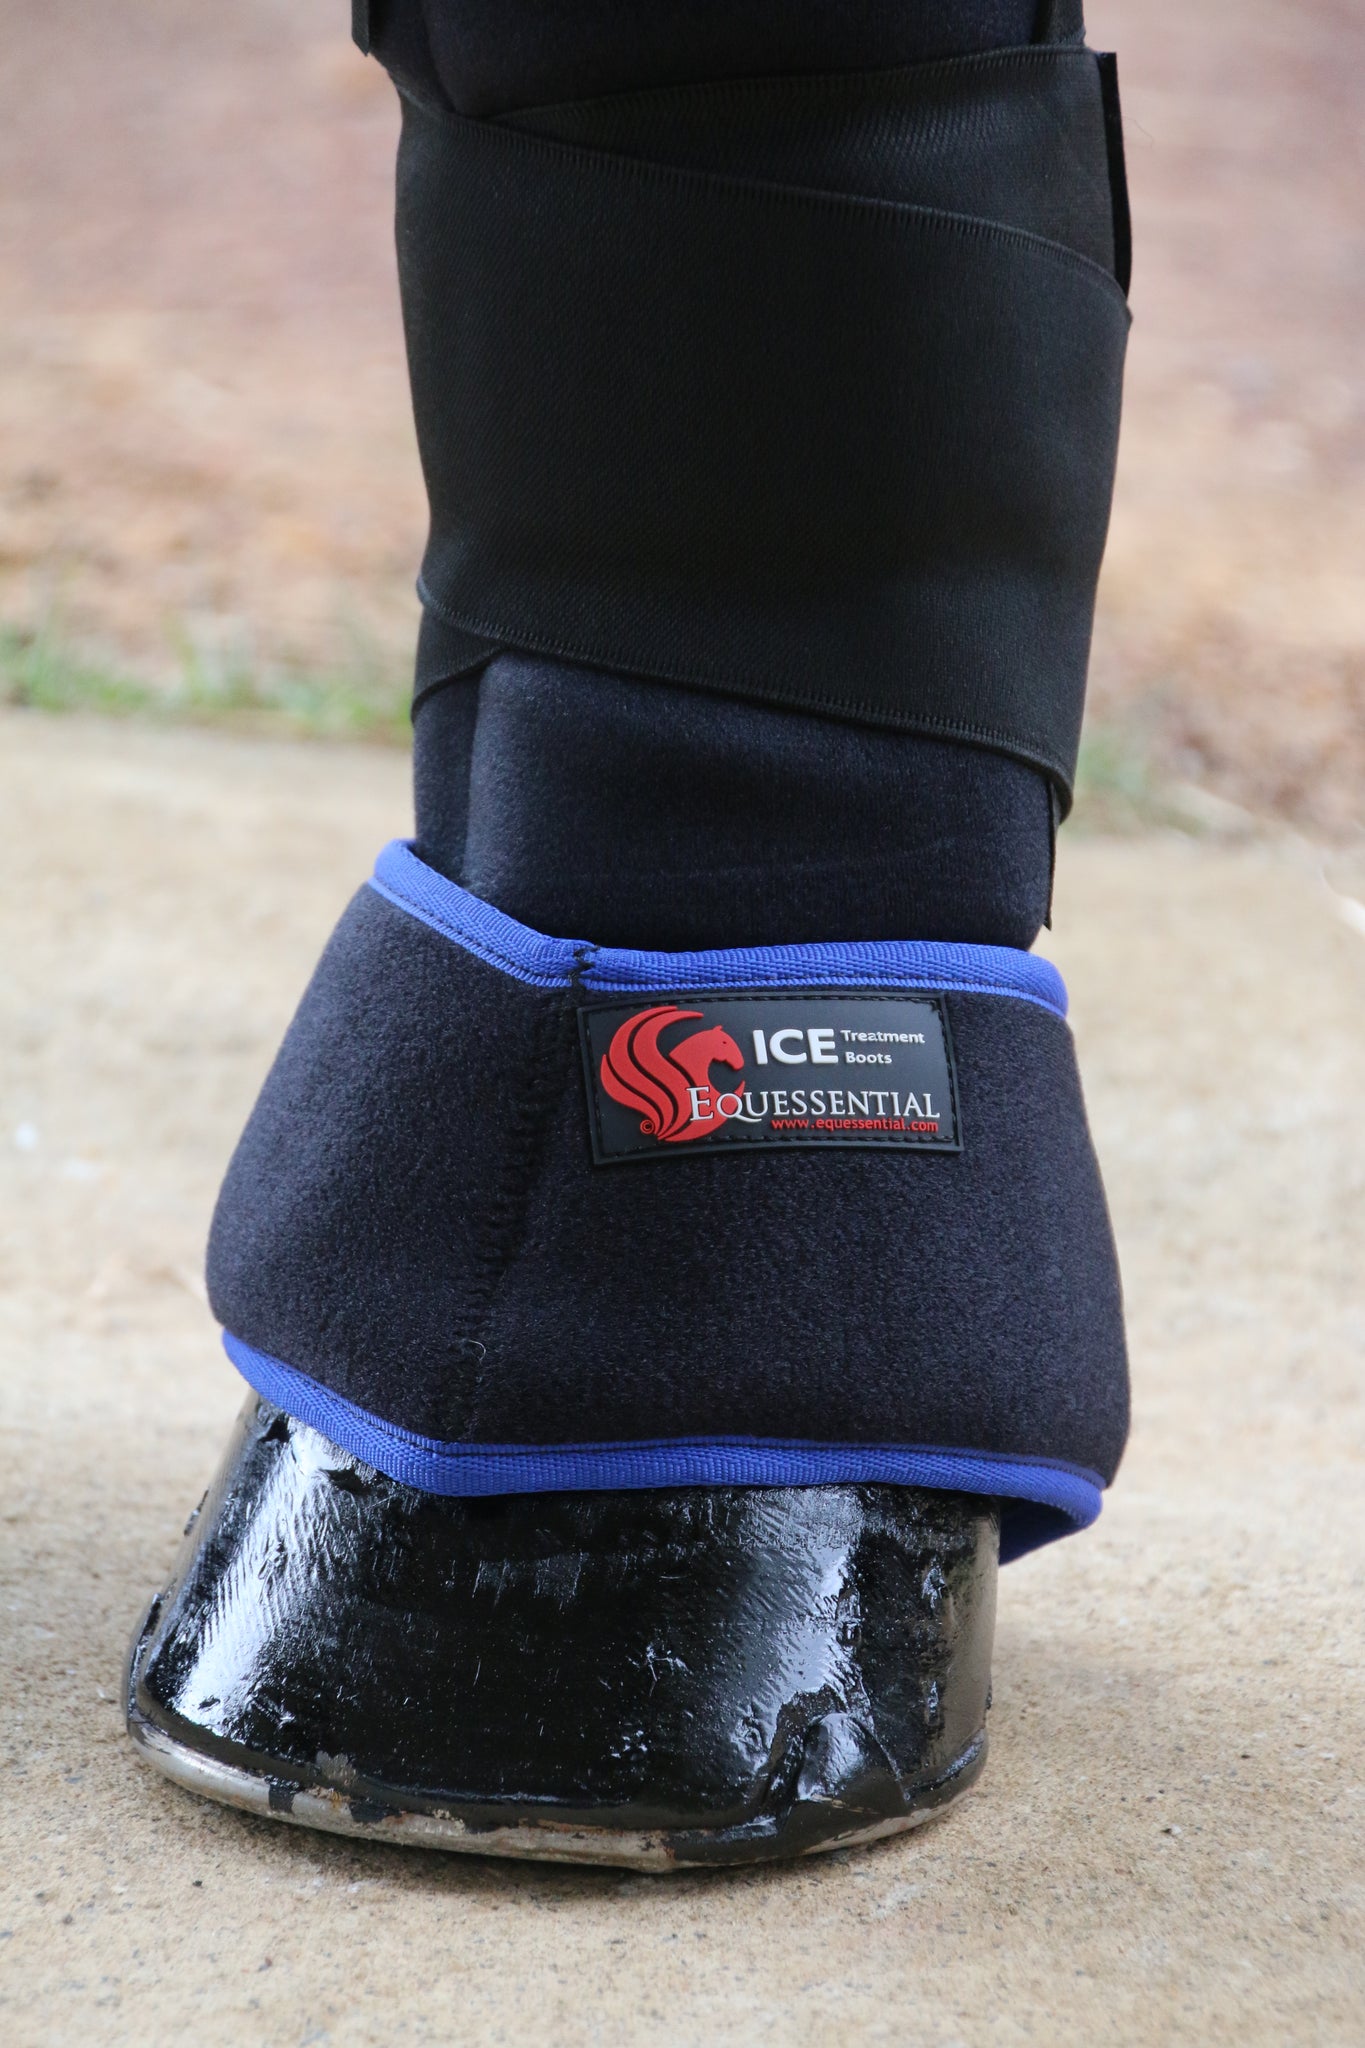 ice hock boots for horses